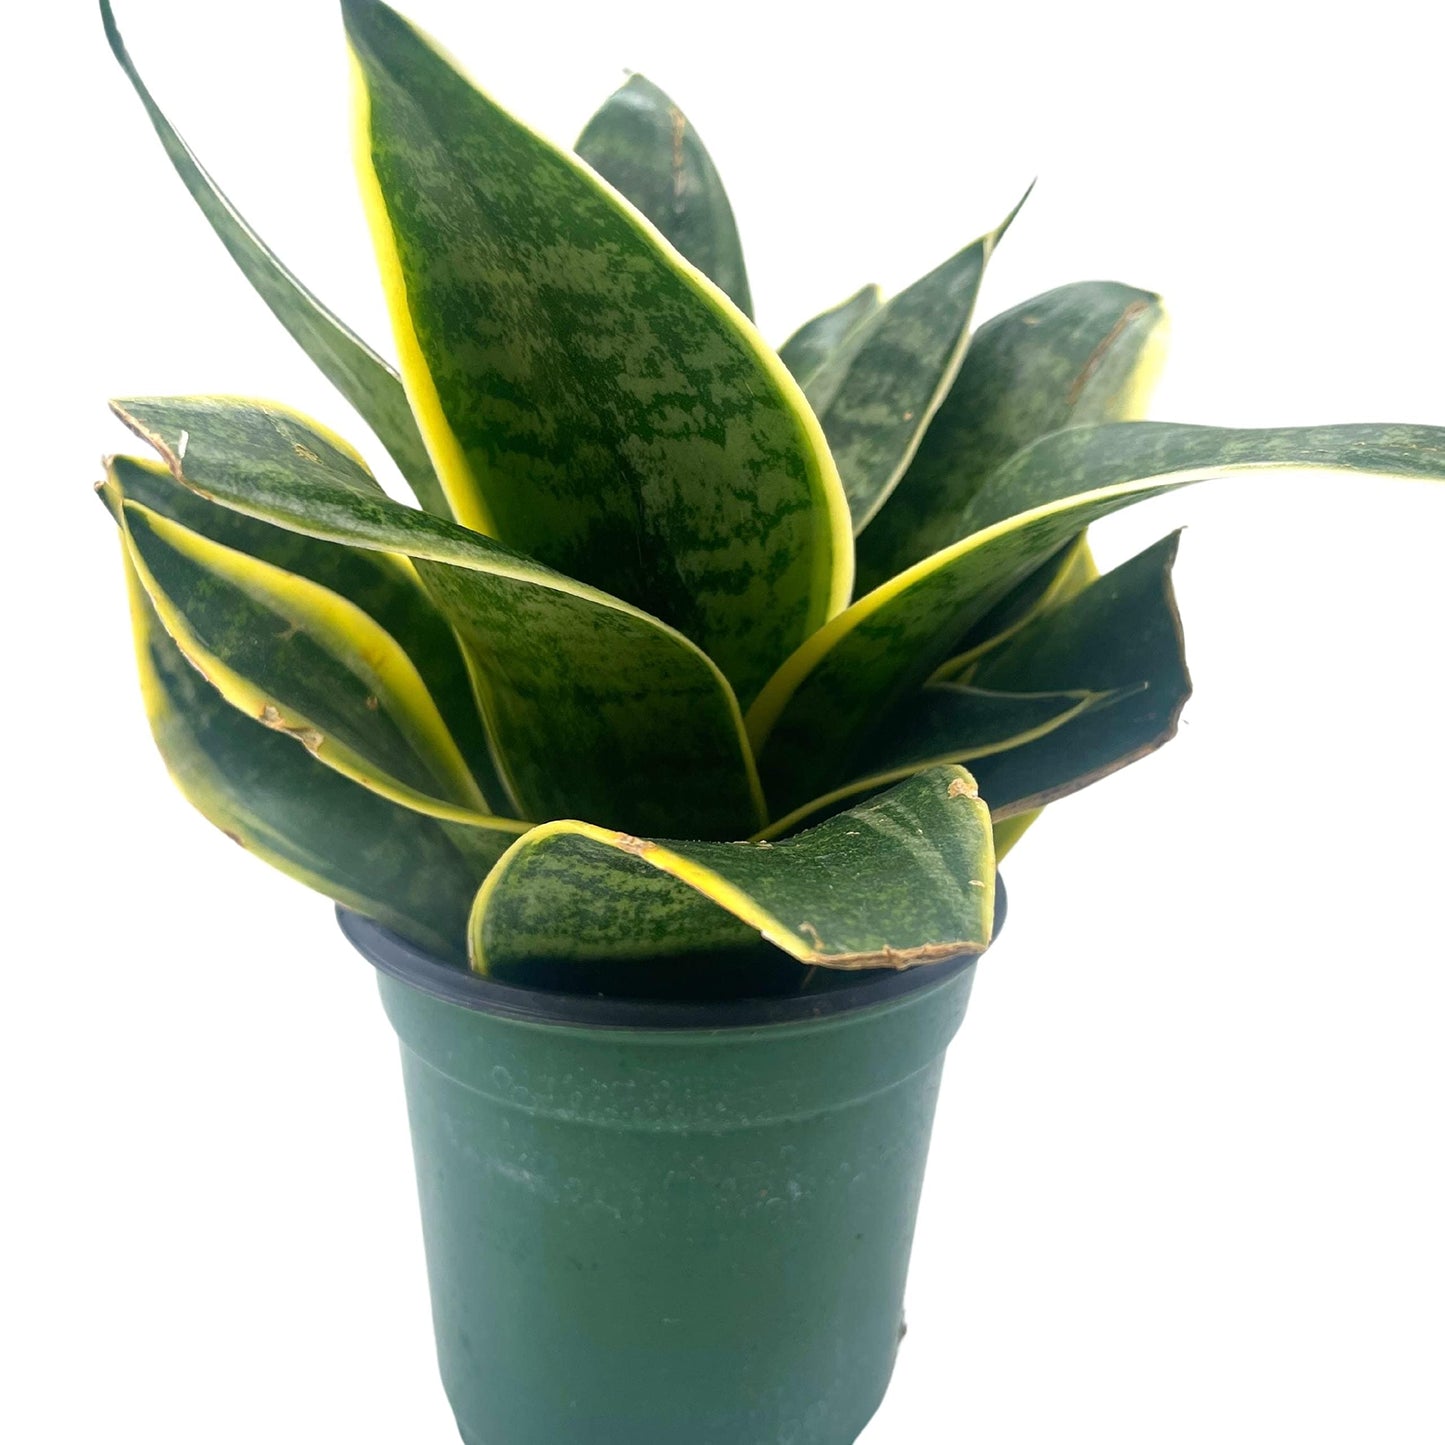 Black Gold Snakeplant, 4 inch, Green and Yellow Snake Plant, Variegated Sansevieria trifasciata, Well Rooted Healthy Starter Succulent